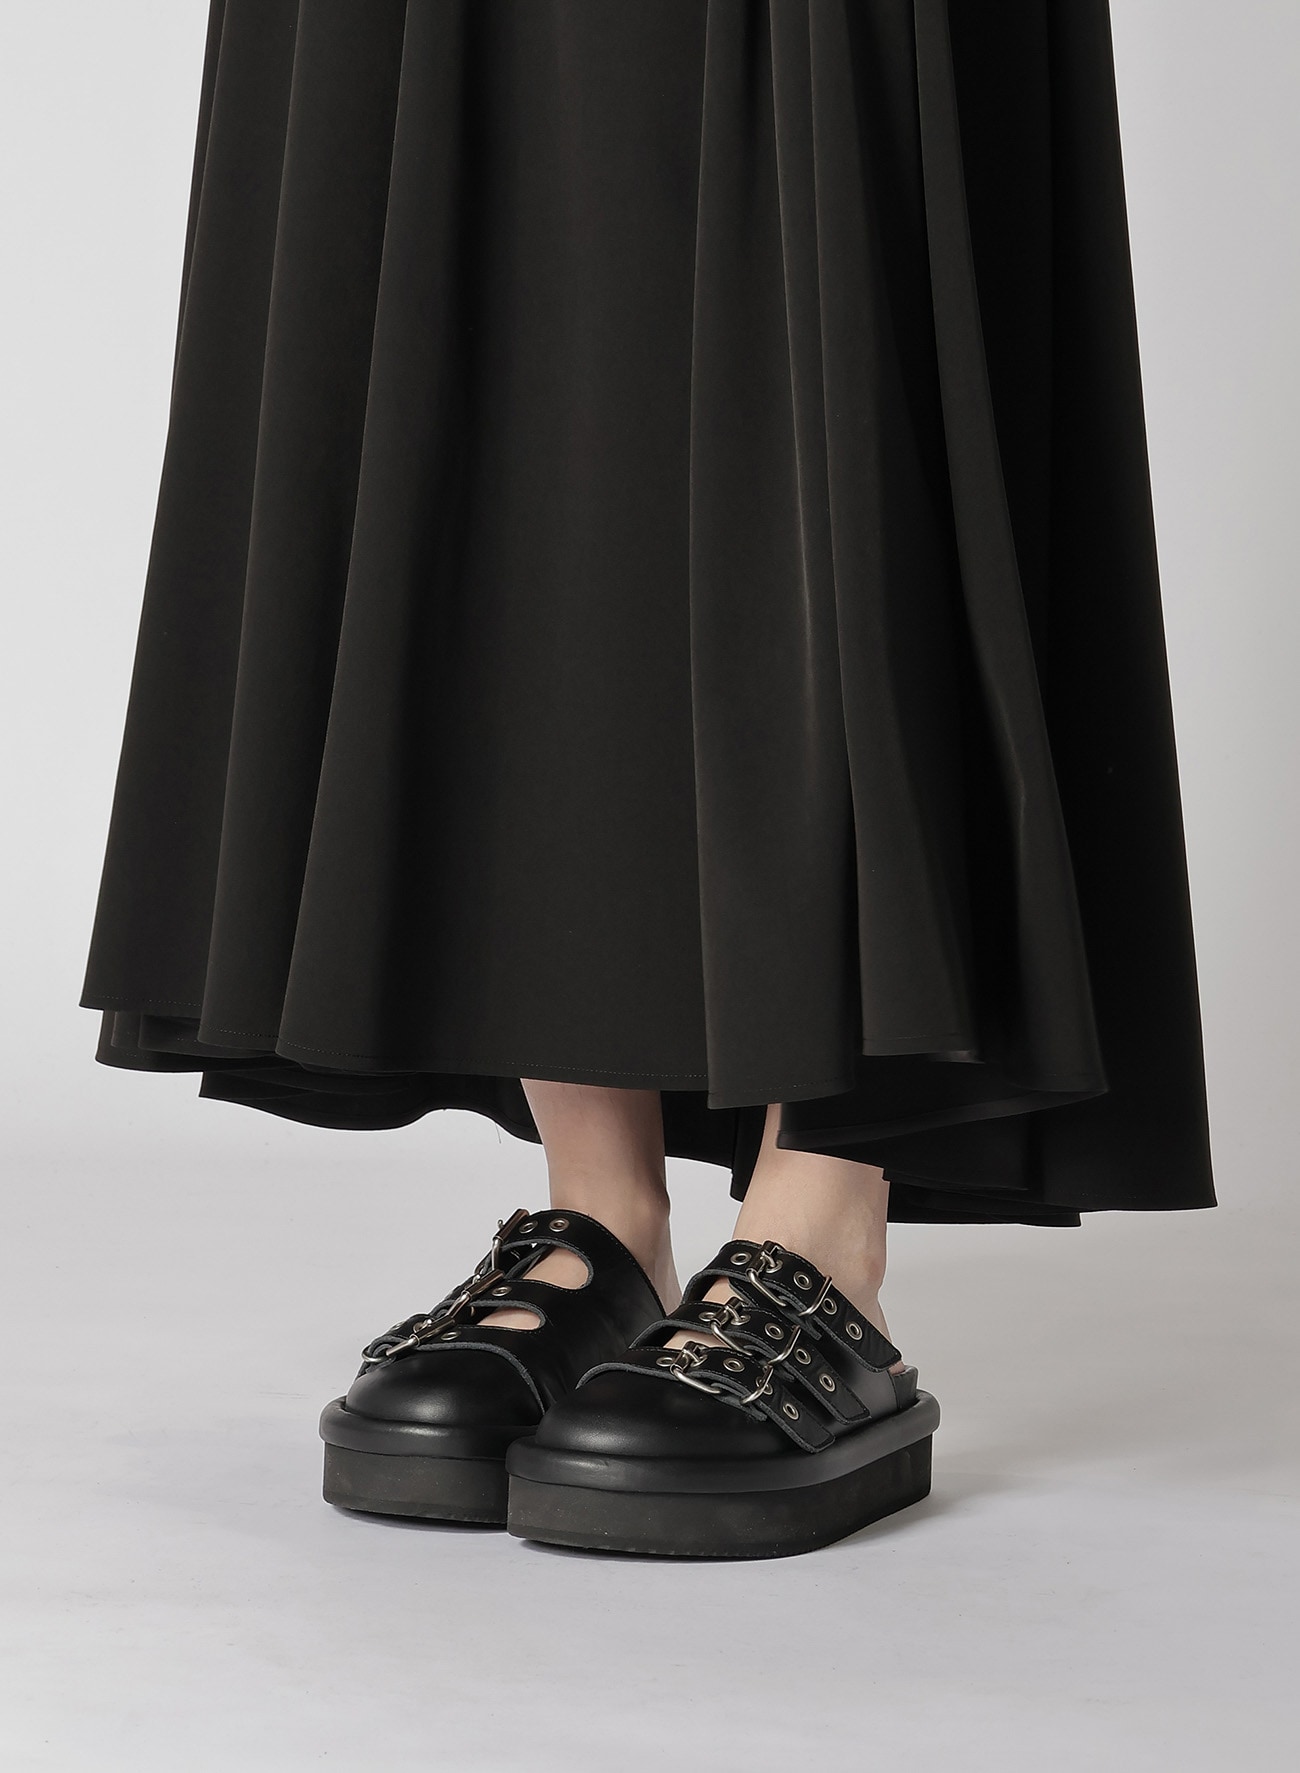 【8/7 12:00 Release】TRIACETATE/POLYESTER SKIRT